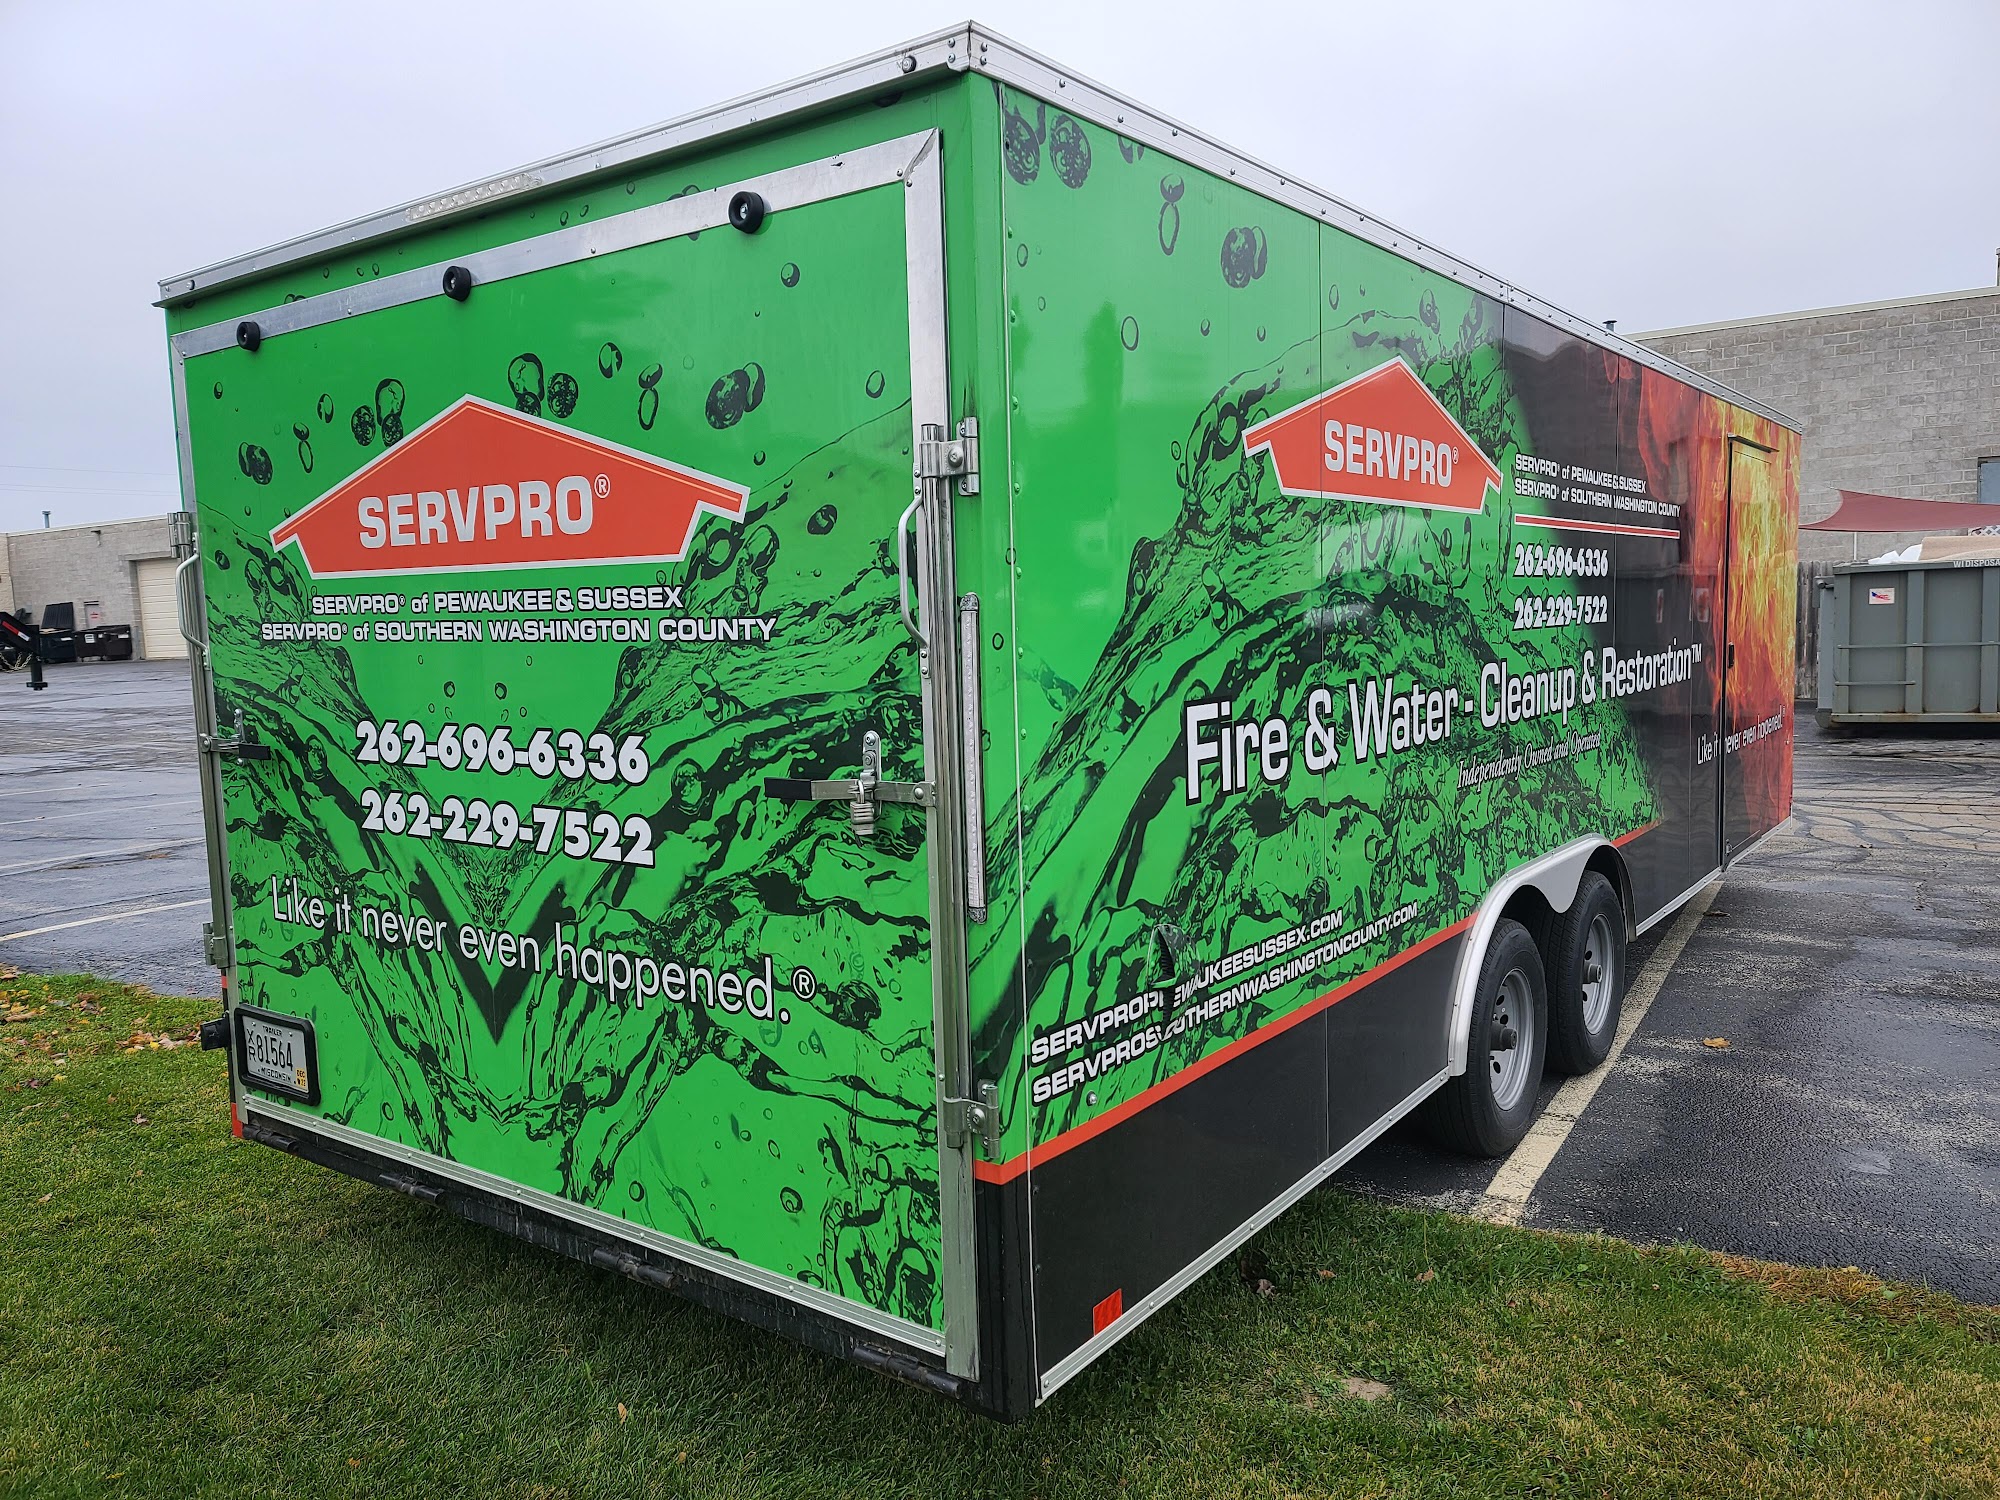 SERVPRO of Pewaukee & Sussex N63W22639 Main St, Sussex Wisconsin 53089